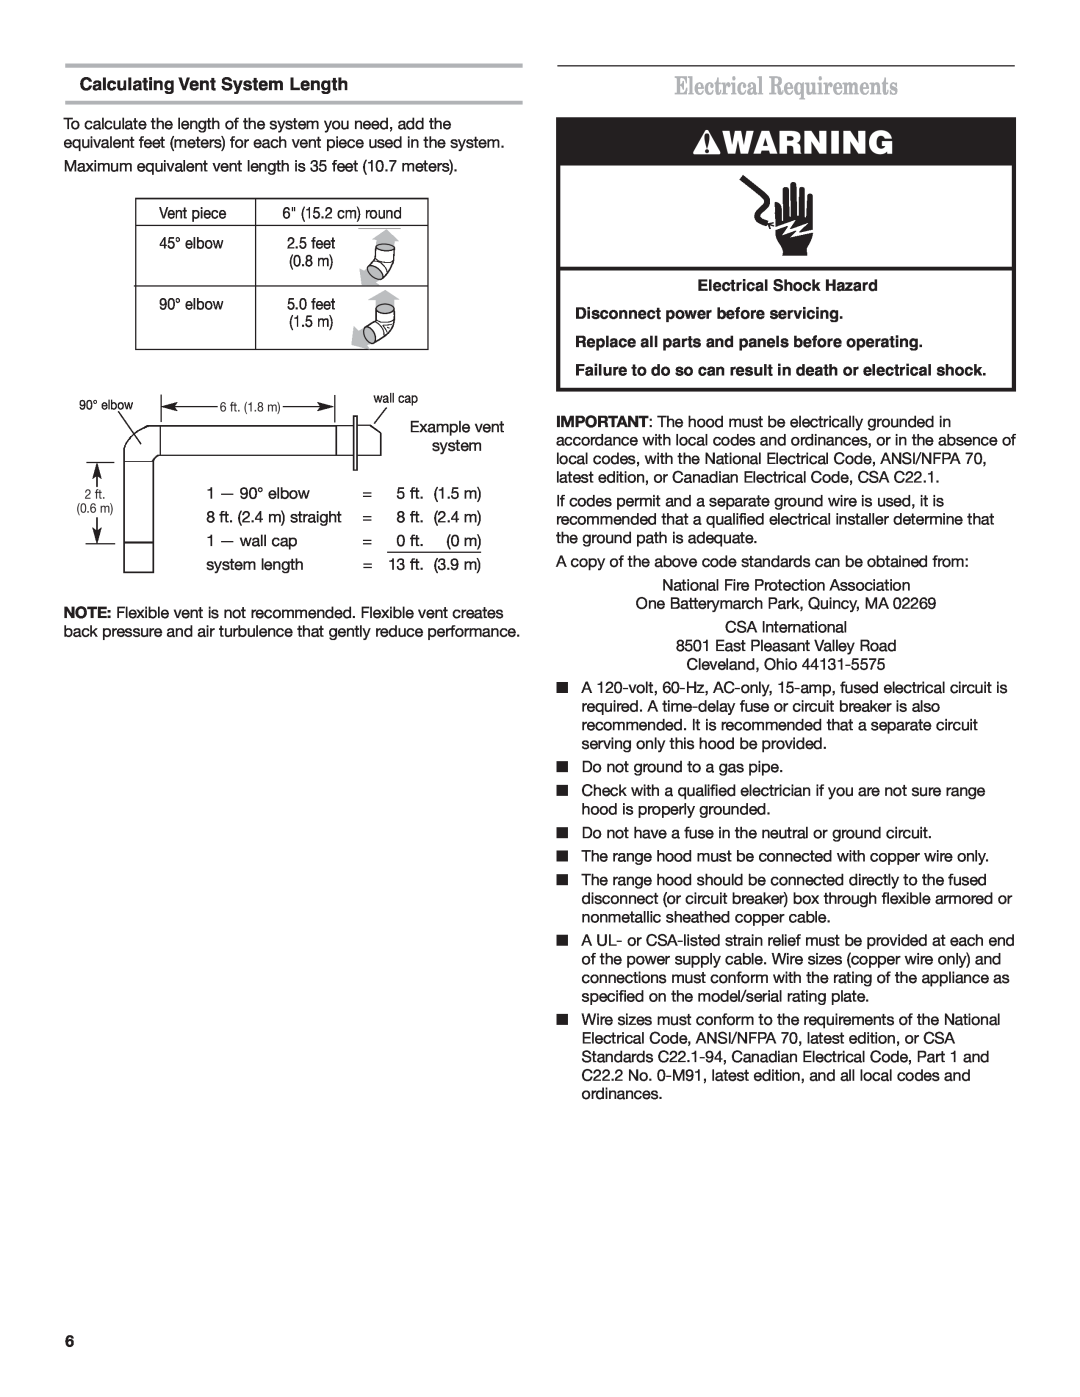 KitchenAid 9763382 Electrical Requirements, Calculating Vent System Length, Replace all parts and panels before operating 